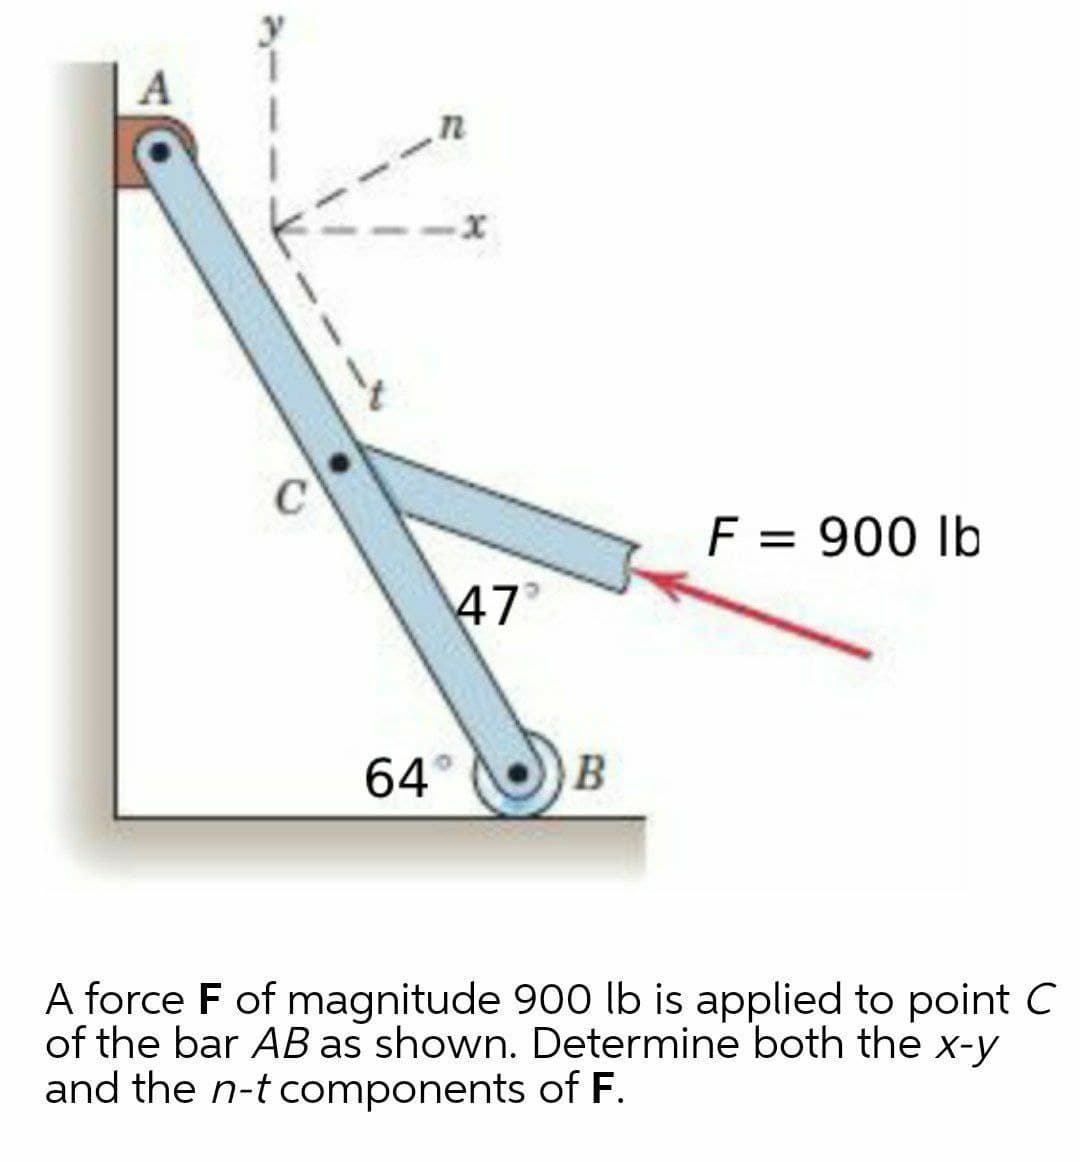 C
F = 900 lb
47
64°
B
A force F of magnitude 900 lb is applied to point C
of the bar AB as shown. Determine both the x-y
and the n-t components of F.
